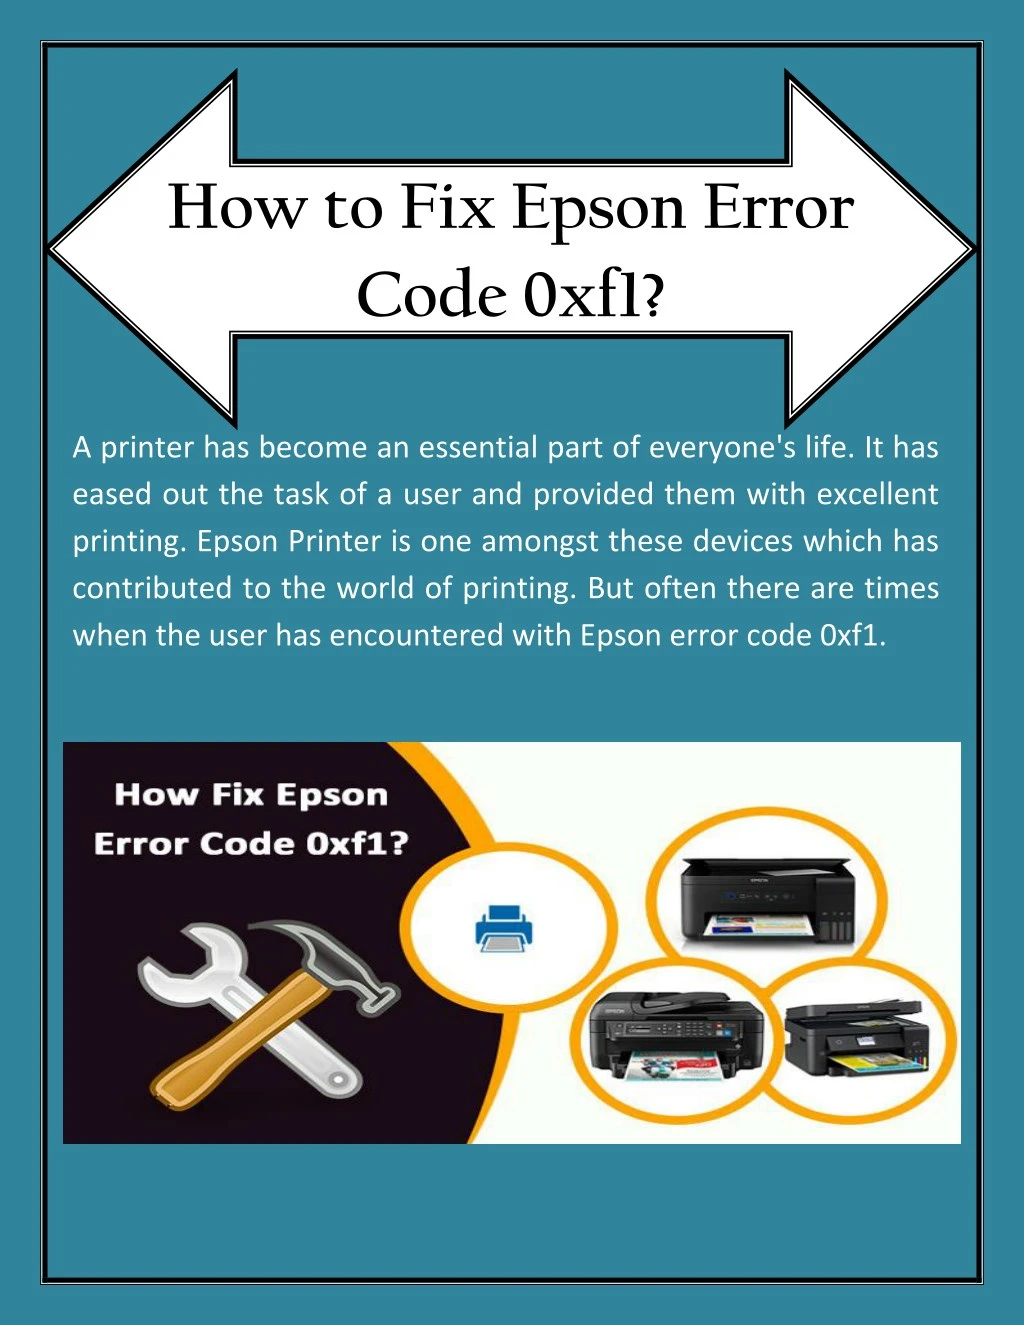 Ppt Contact Epson Support Number And Fix Epson Error Code 0xf1 Powerpoint Presentation Id 6332